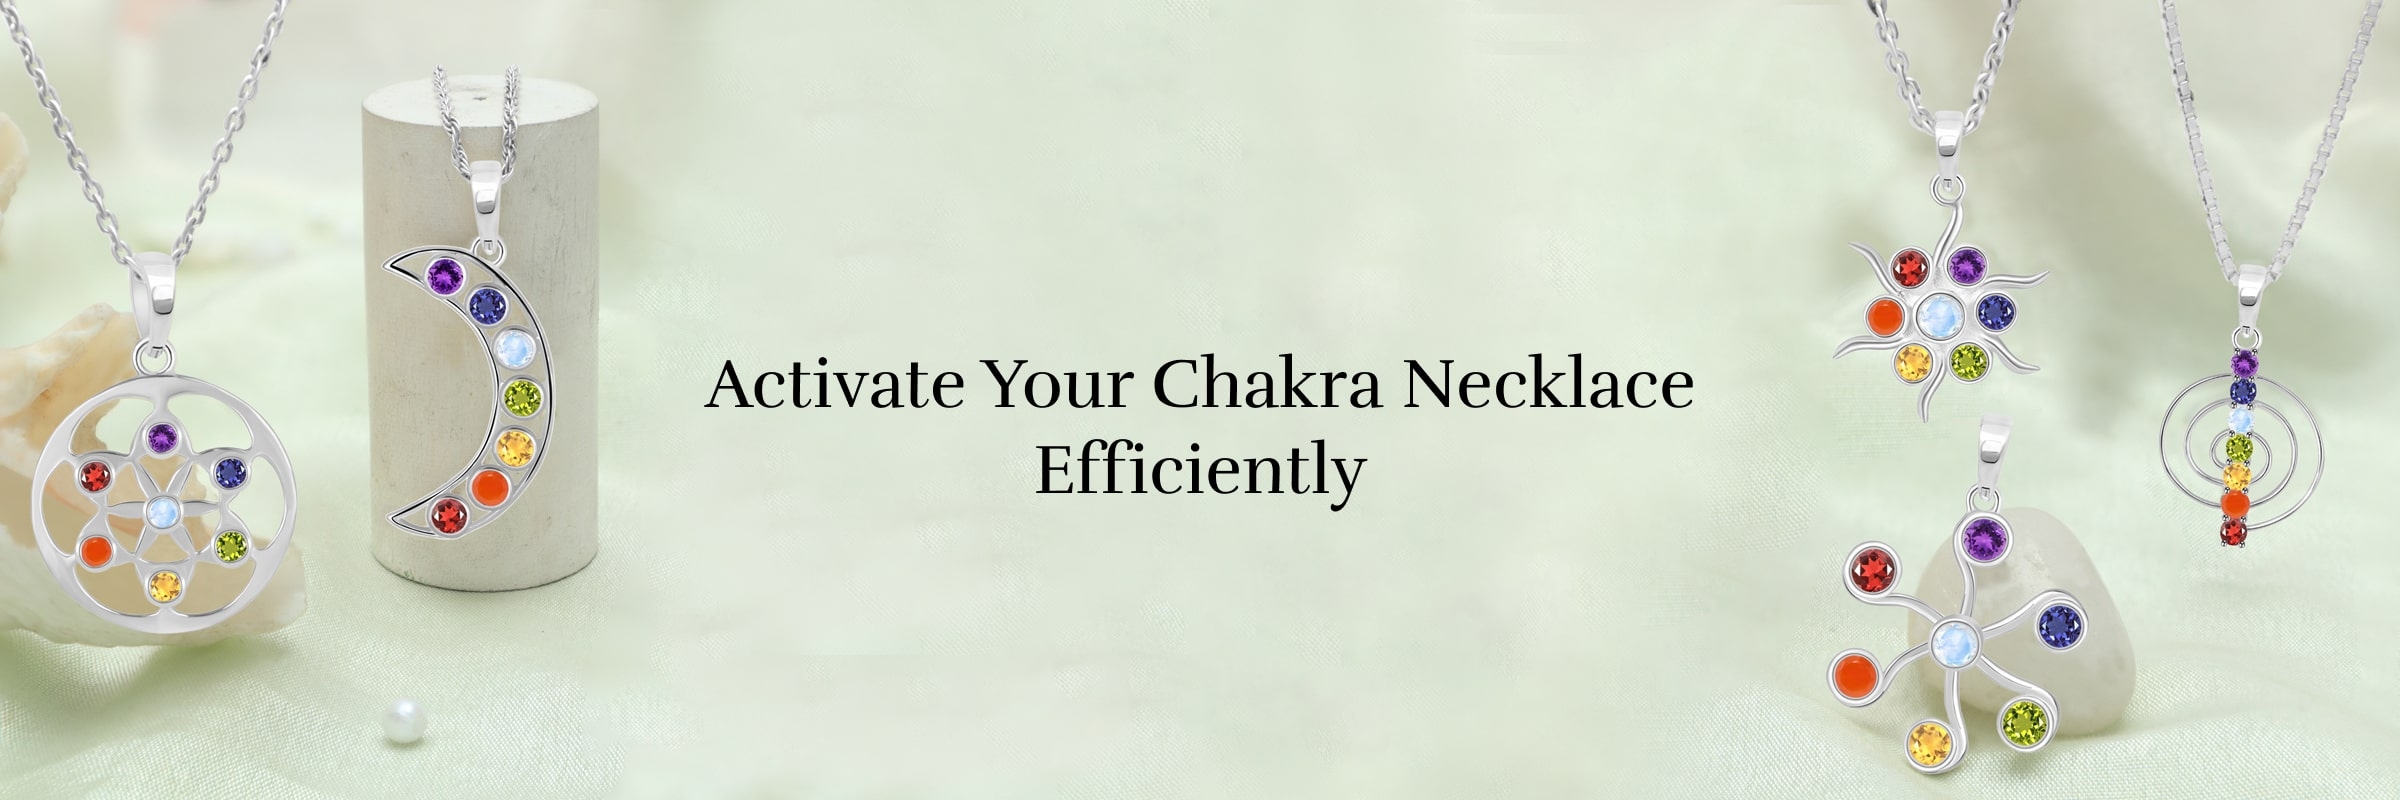 How to Activate a Chakra Necklace